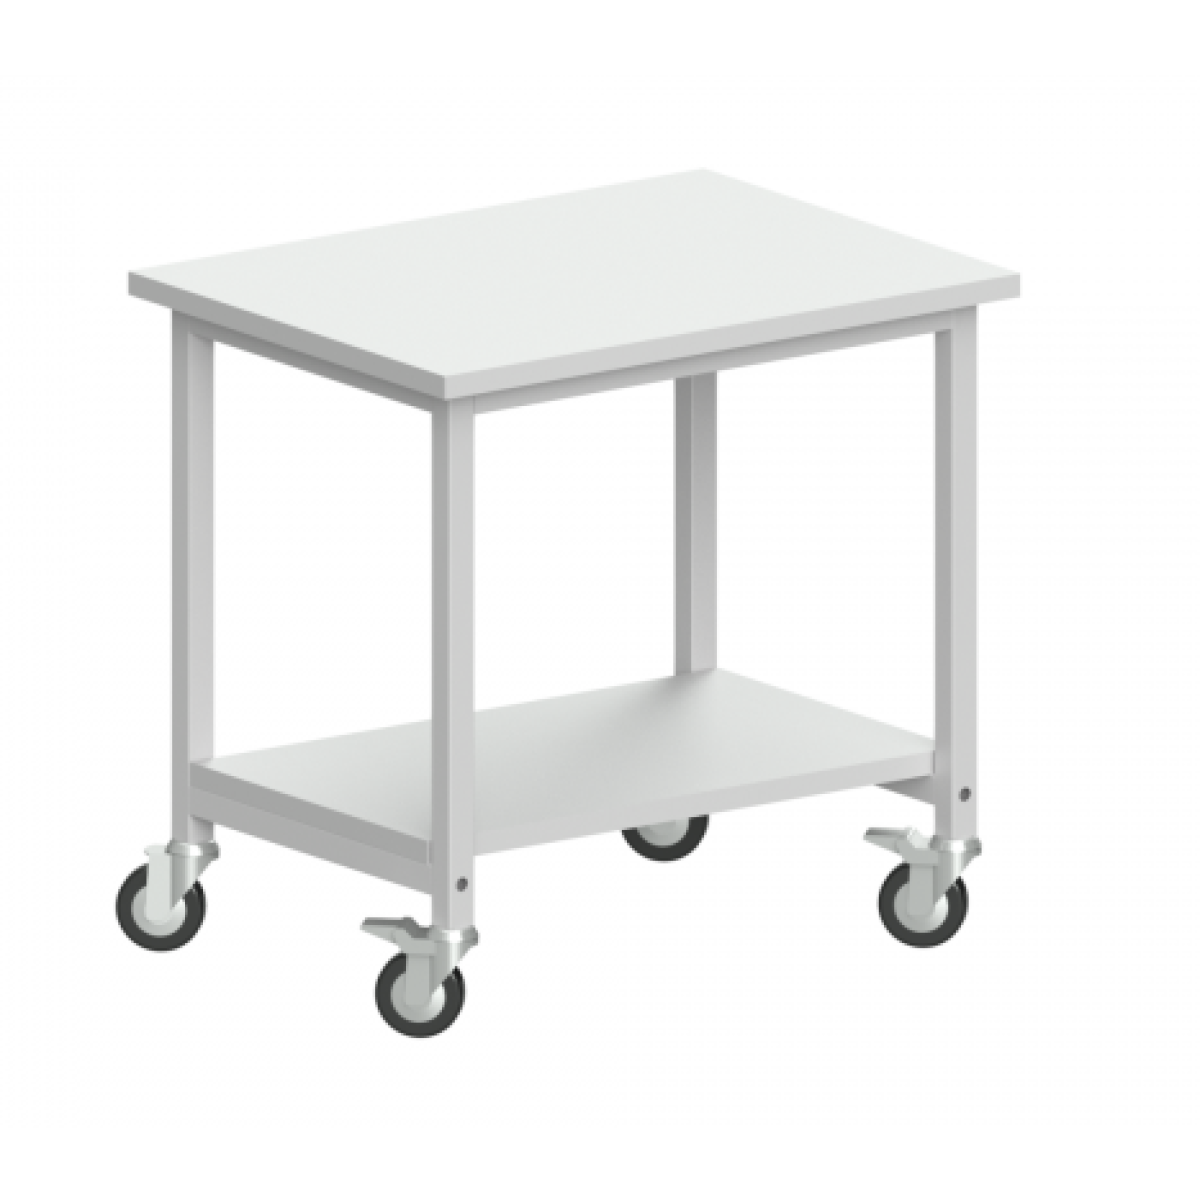 ESD table - side trolley